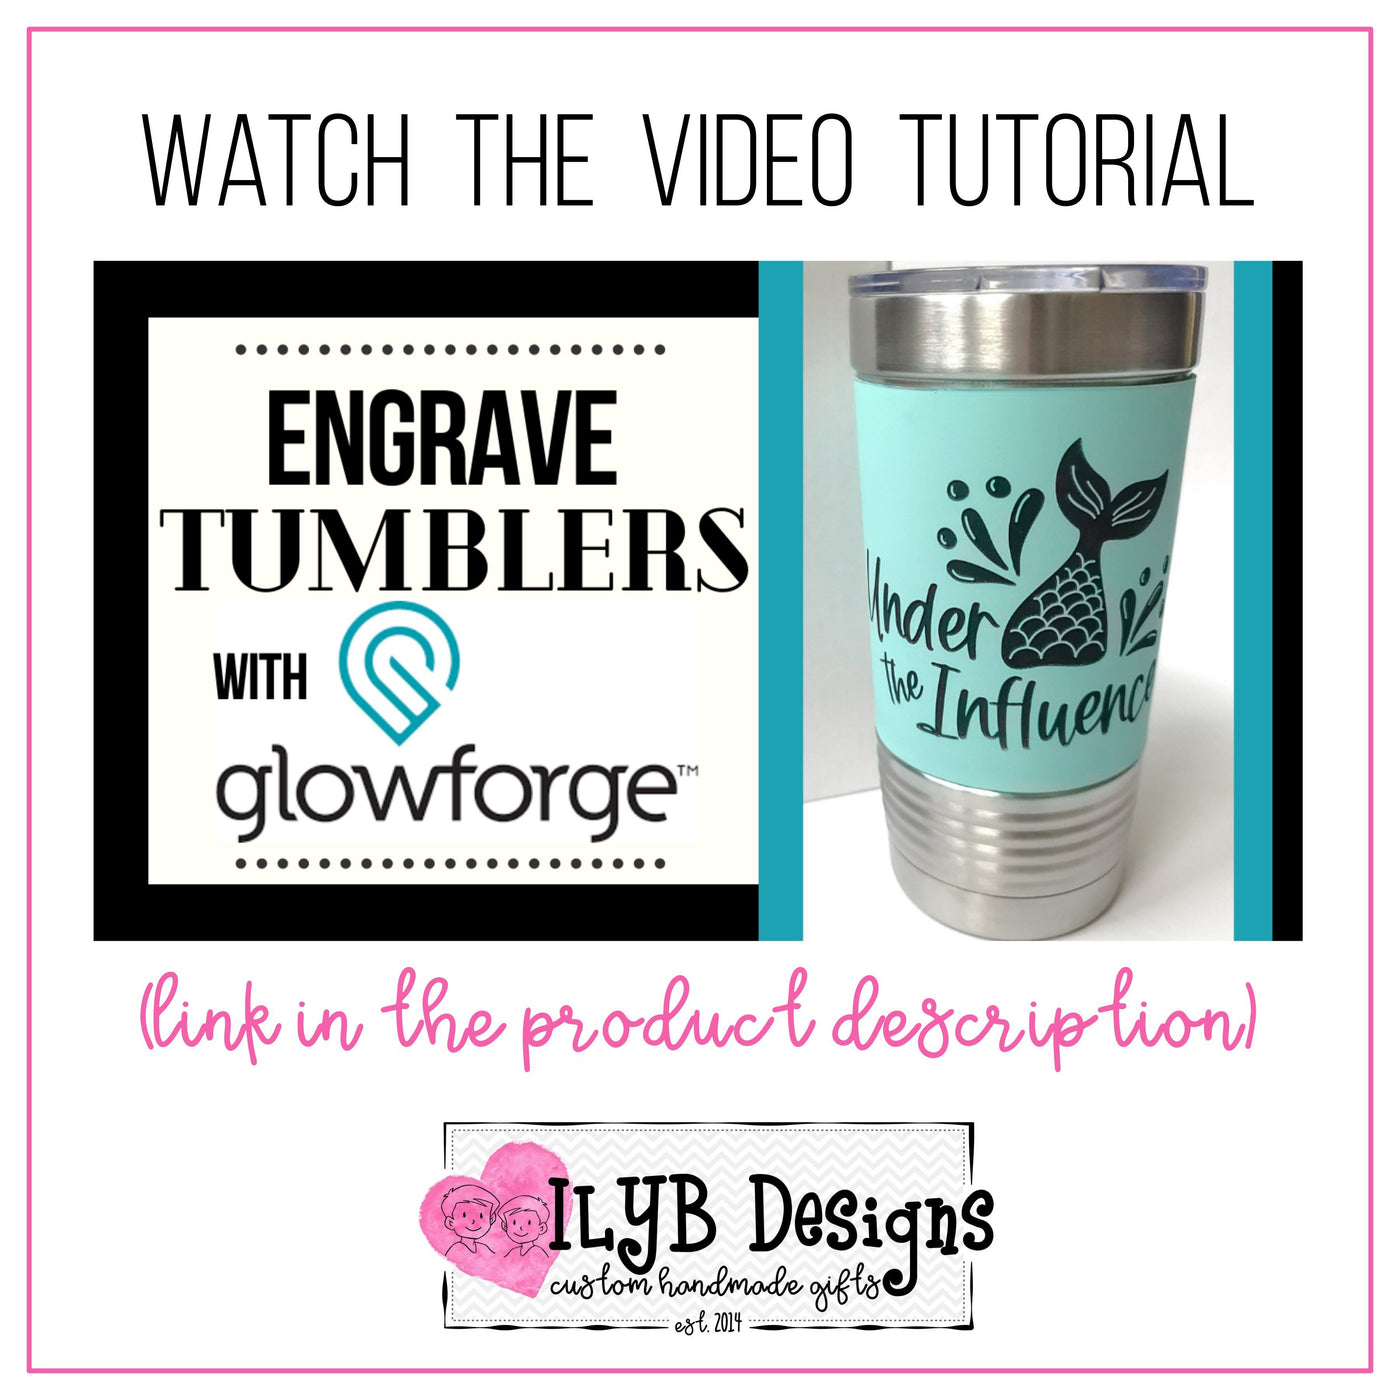 Watch the video tutorial "Engrave Tumblers with a Glowforge" by using the link in the product description.